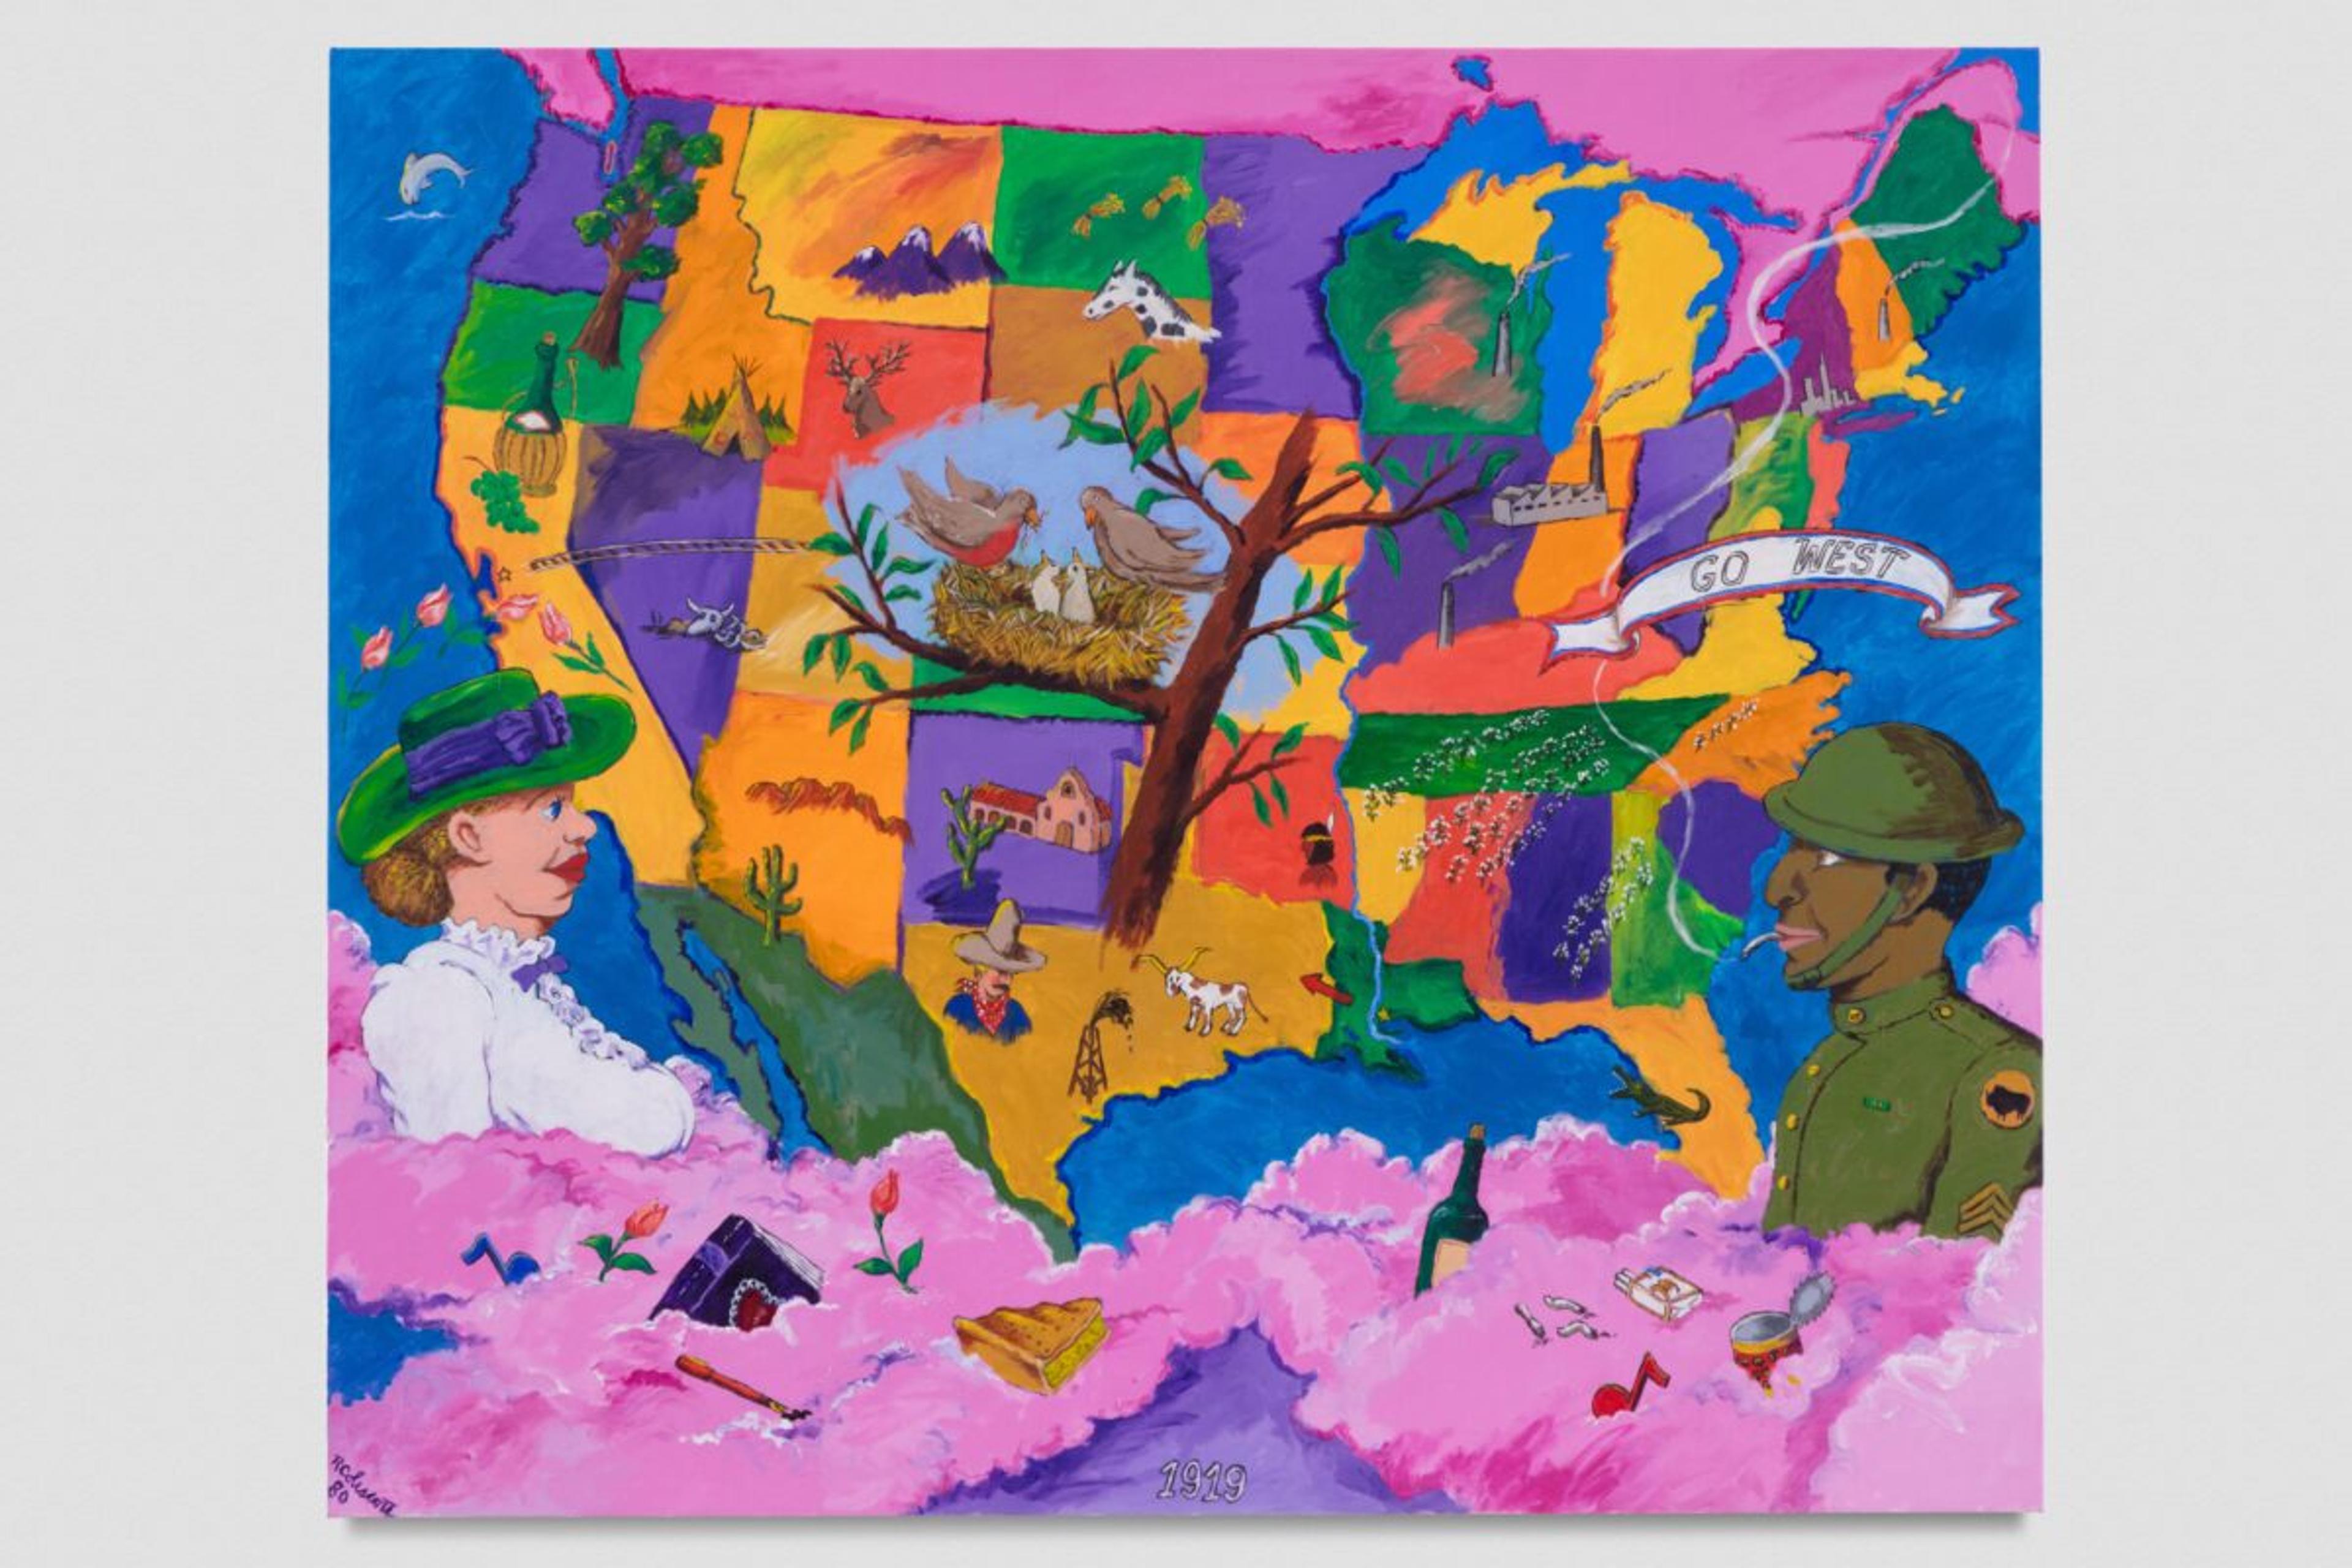 1919 (1980) by Robert Colescott is estimated to bring in seven figures and become one of the most valuable of the artist's works ever sold at auction. Robert H. Colescott Separate Property Trust / Artists Rights Society (ARS), New York